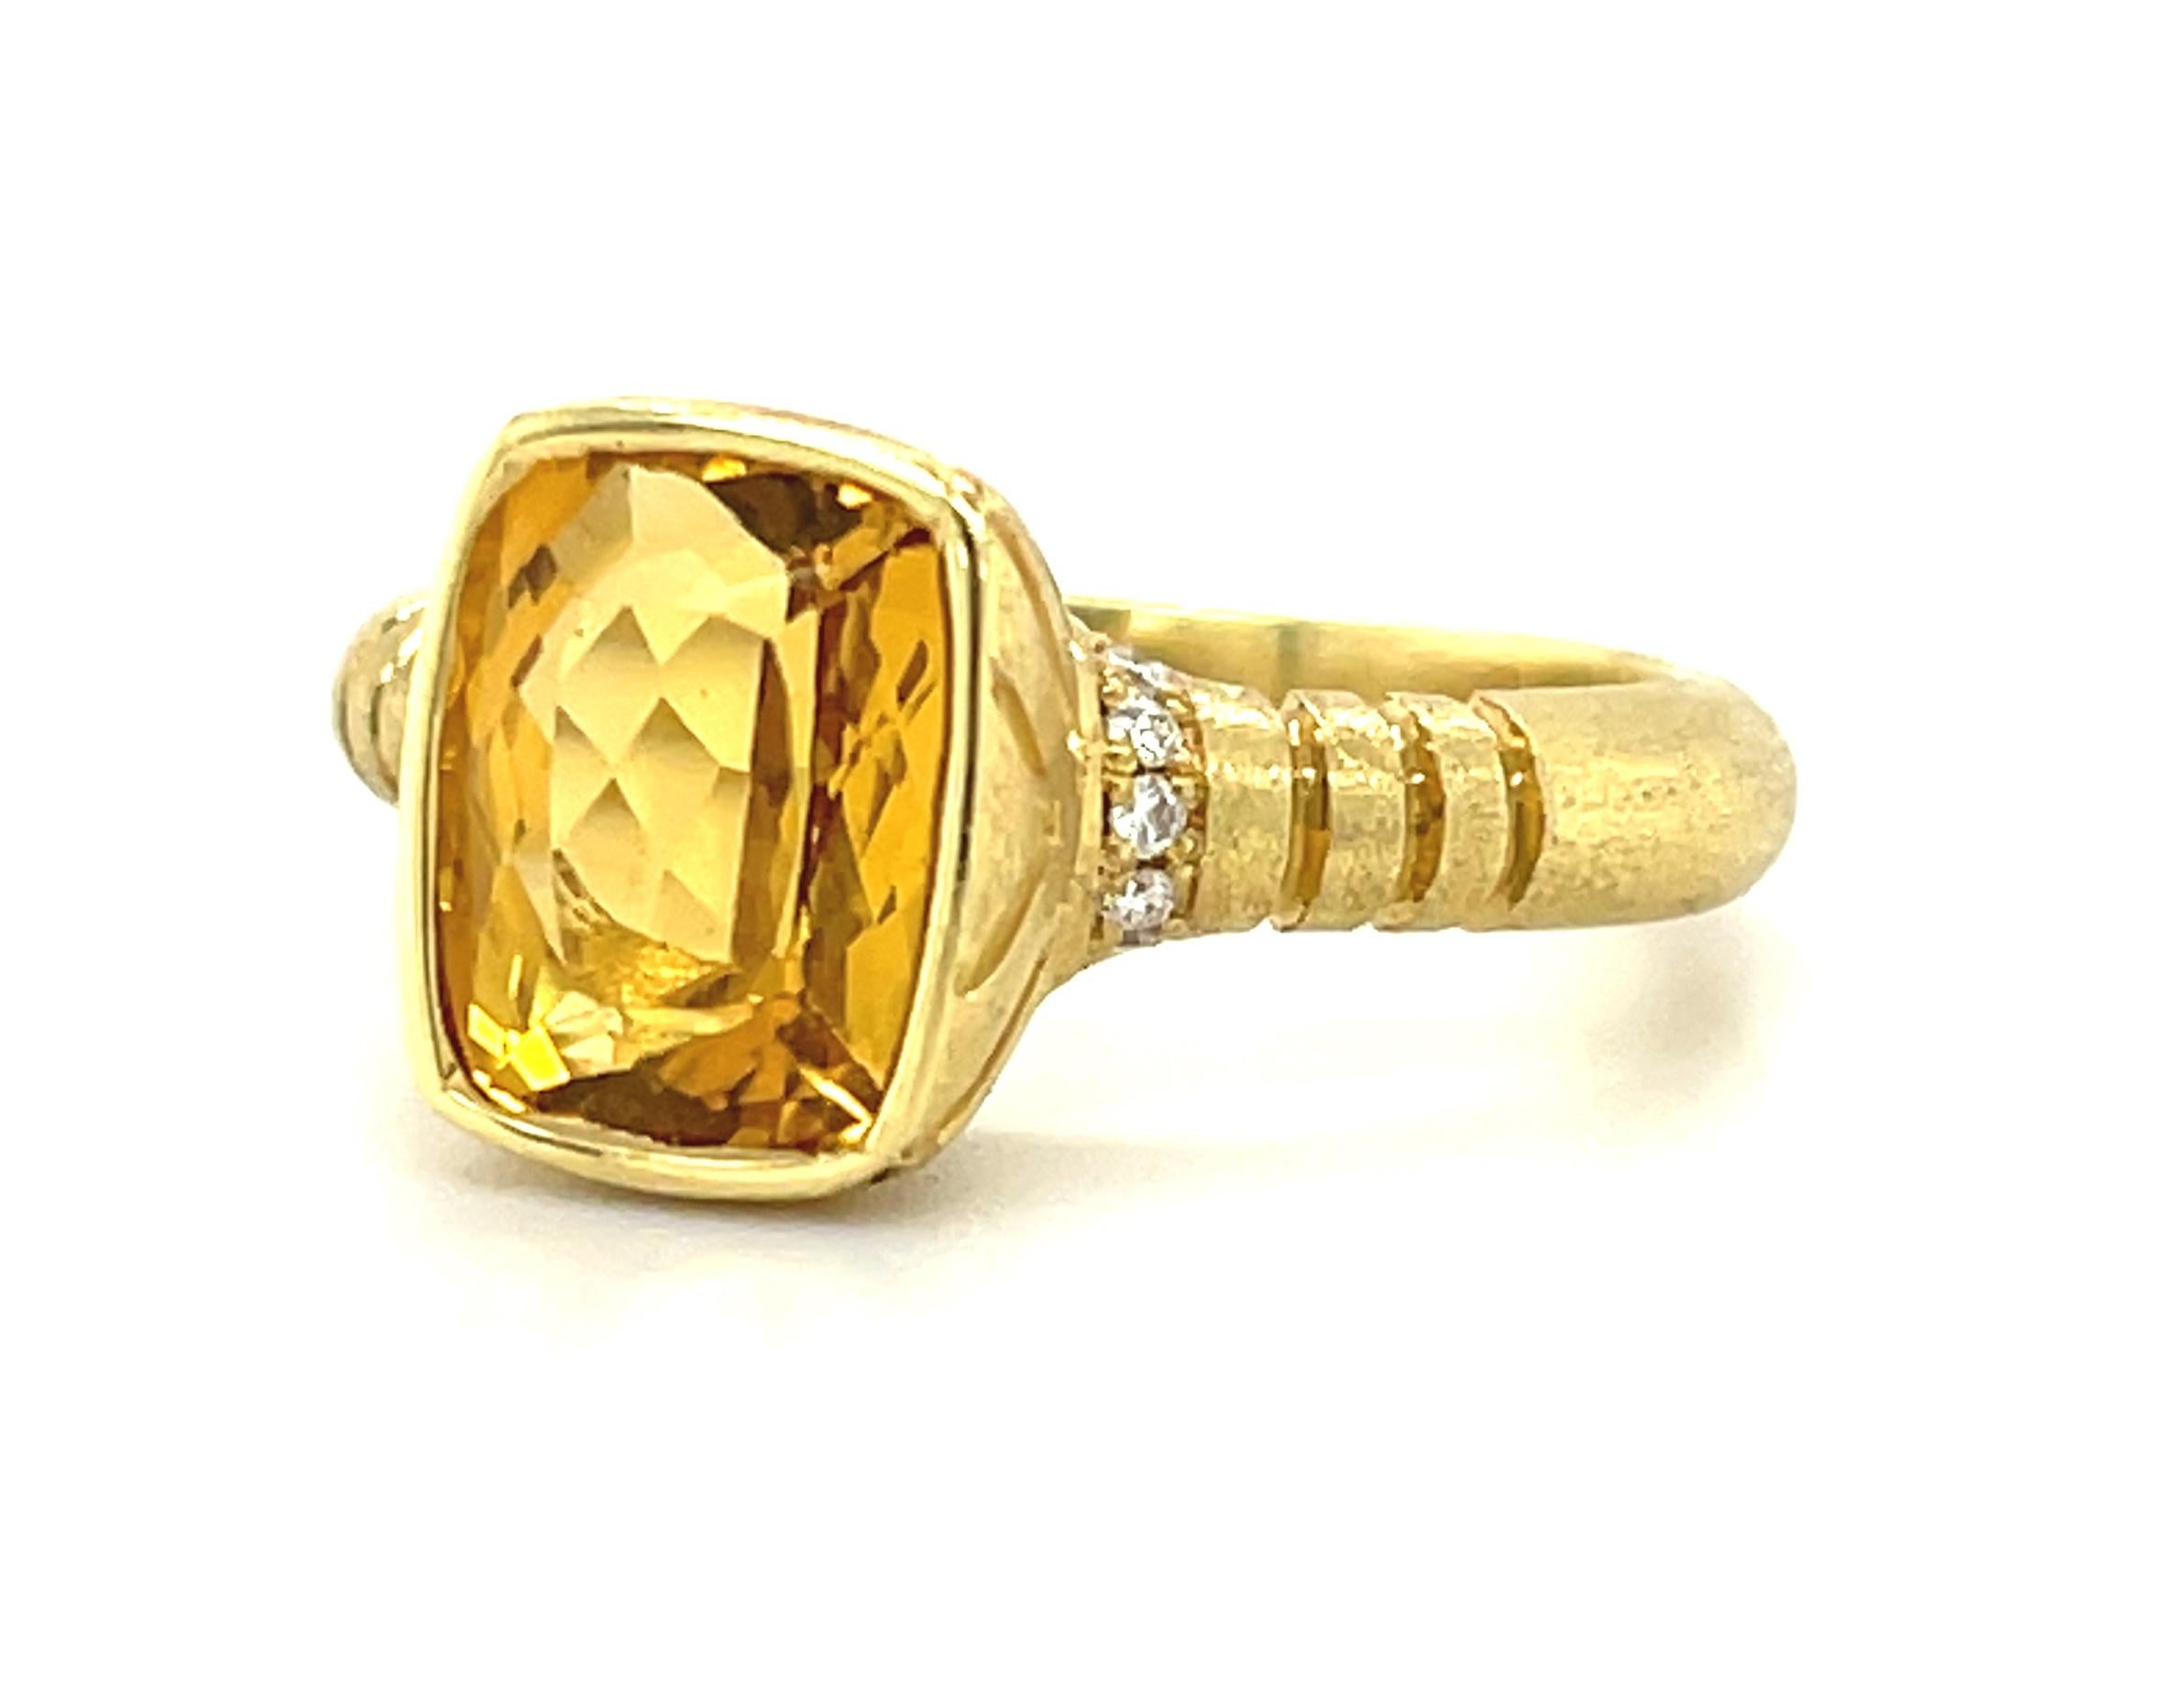  Golden Beryl and Diamond Ring in 18k Yellow Gold, 2.76 Carats In New Condition For Sale In Los Angeles, CA